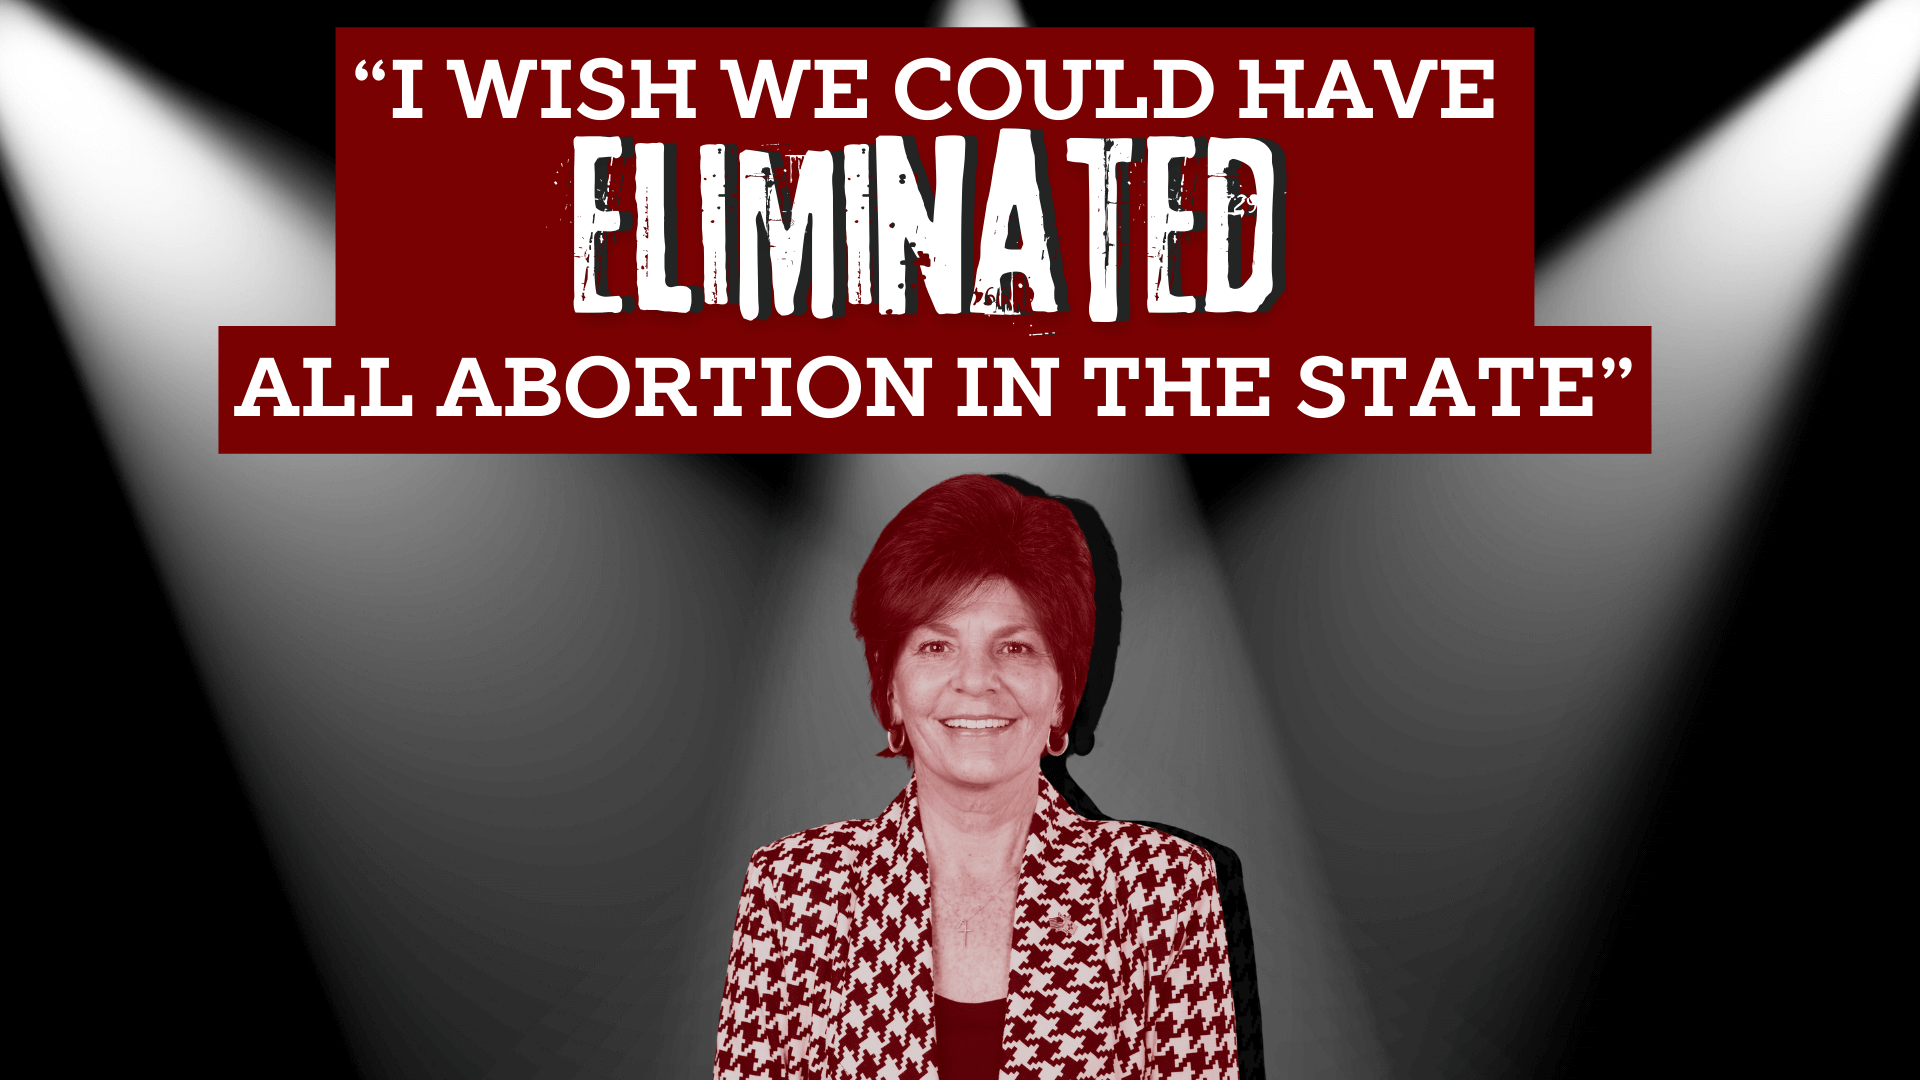 Caution: NM Republicans Only Pretending To Soften Their Stance On Abortion Access